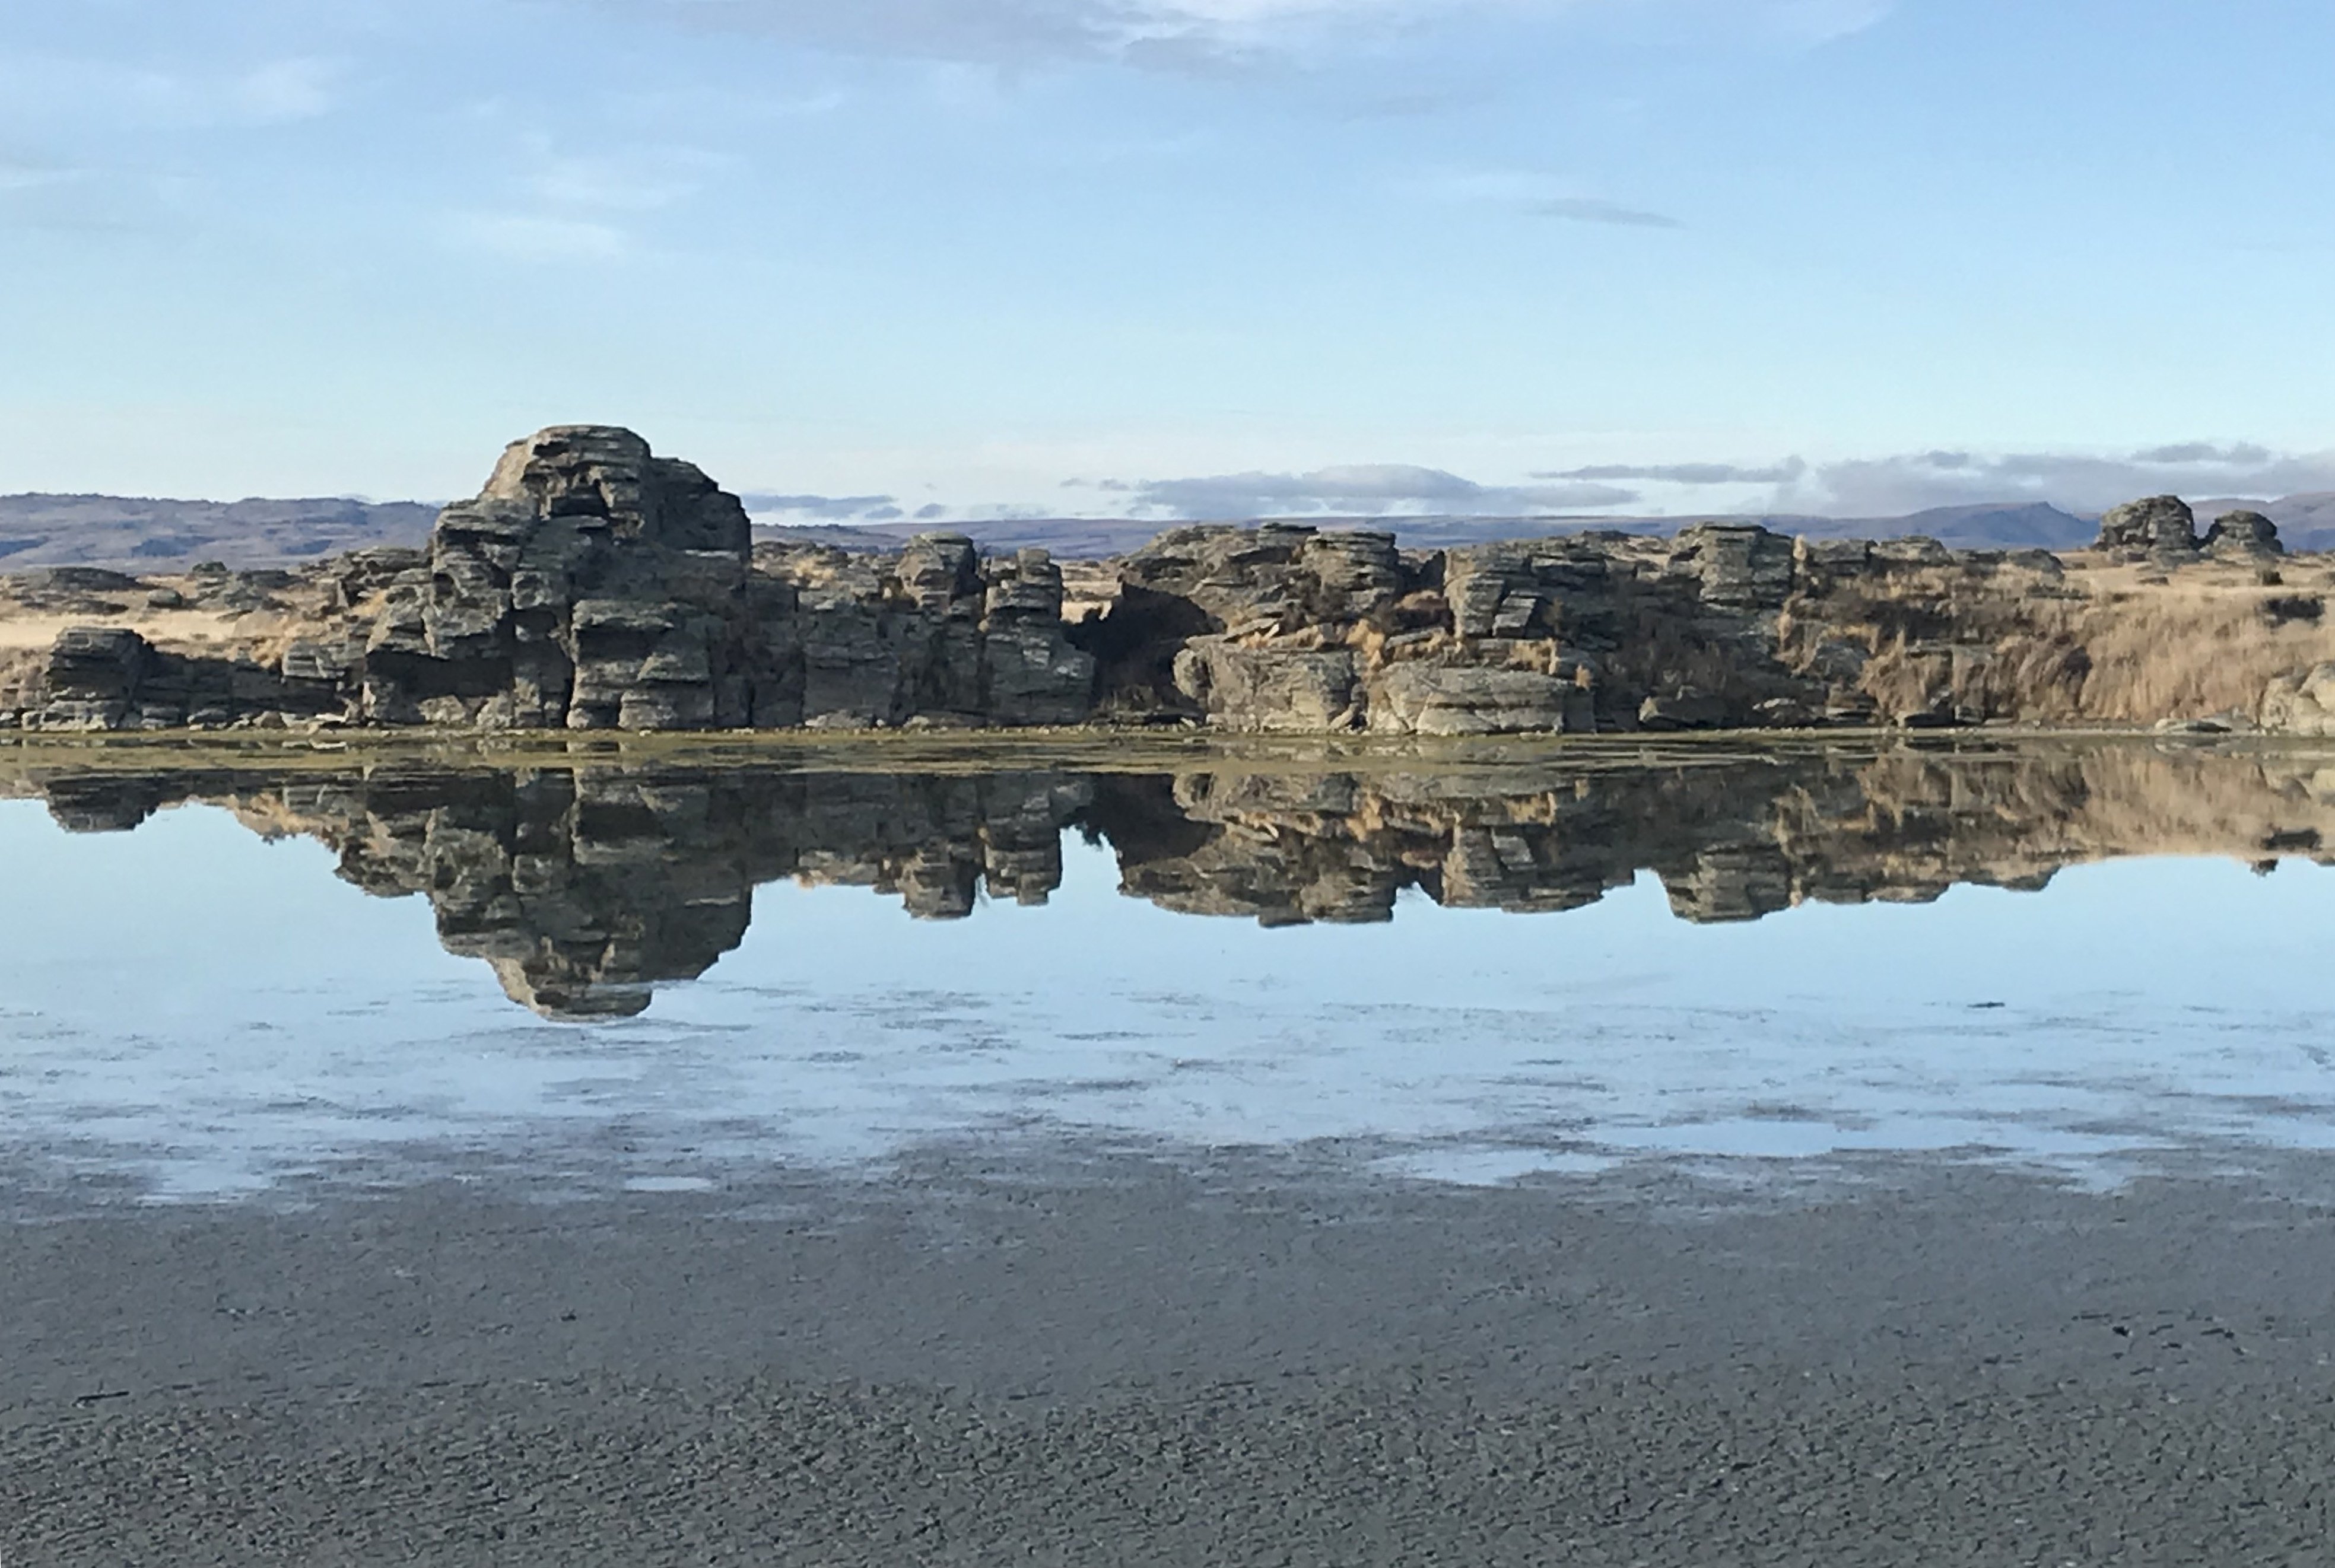 Reflections on Sutton Salt Lake in early spring.